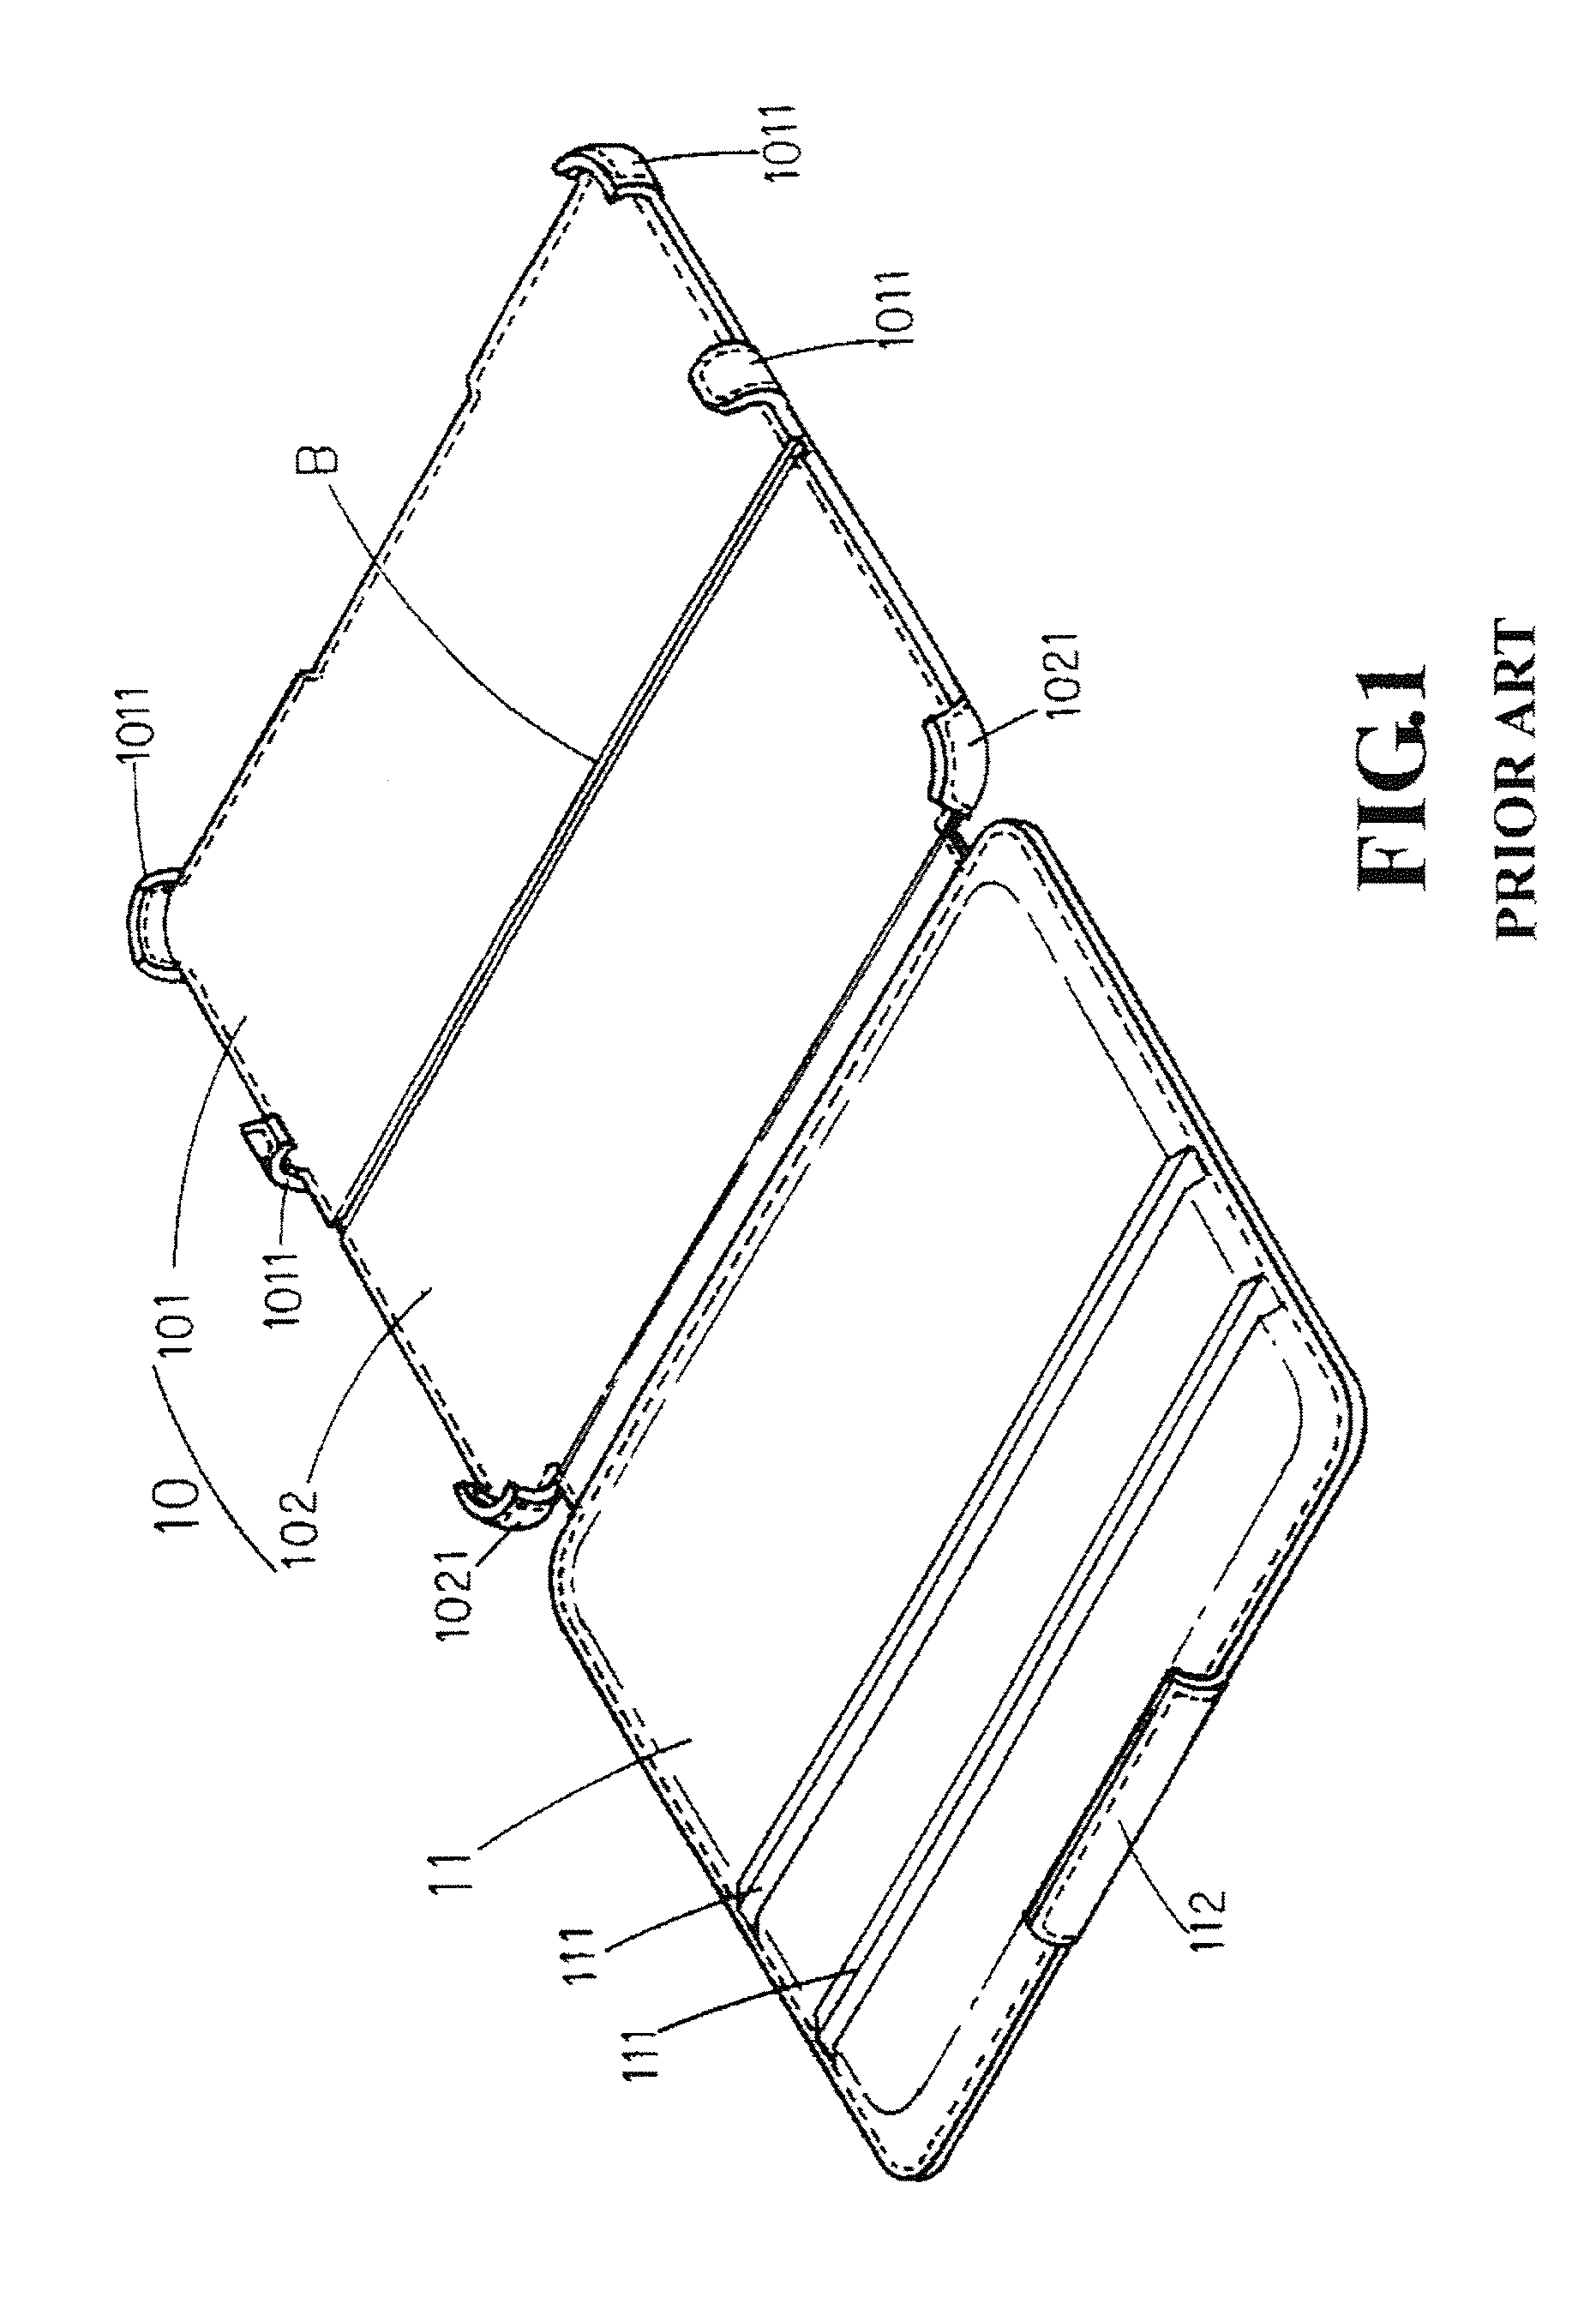 Protective cover unfolding and positioning device